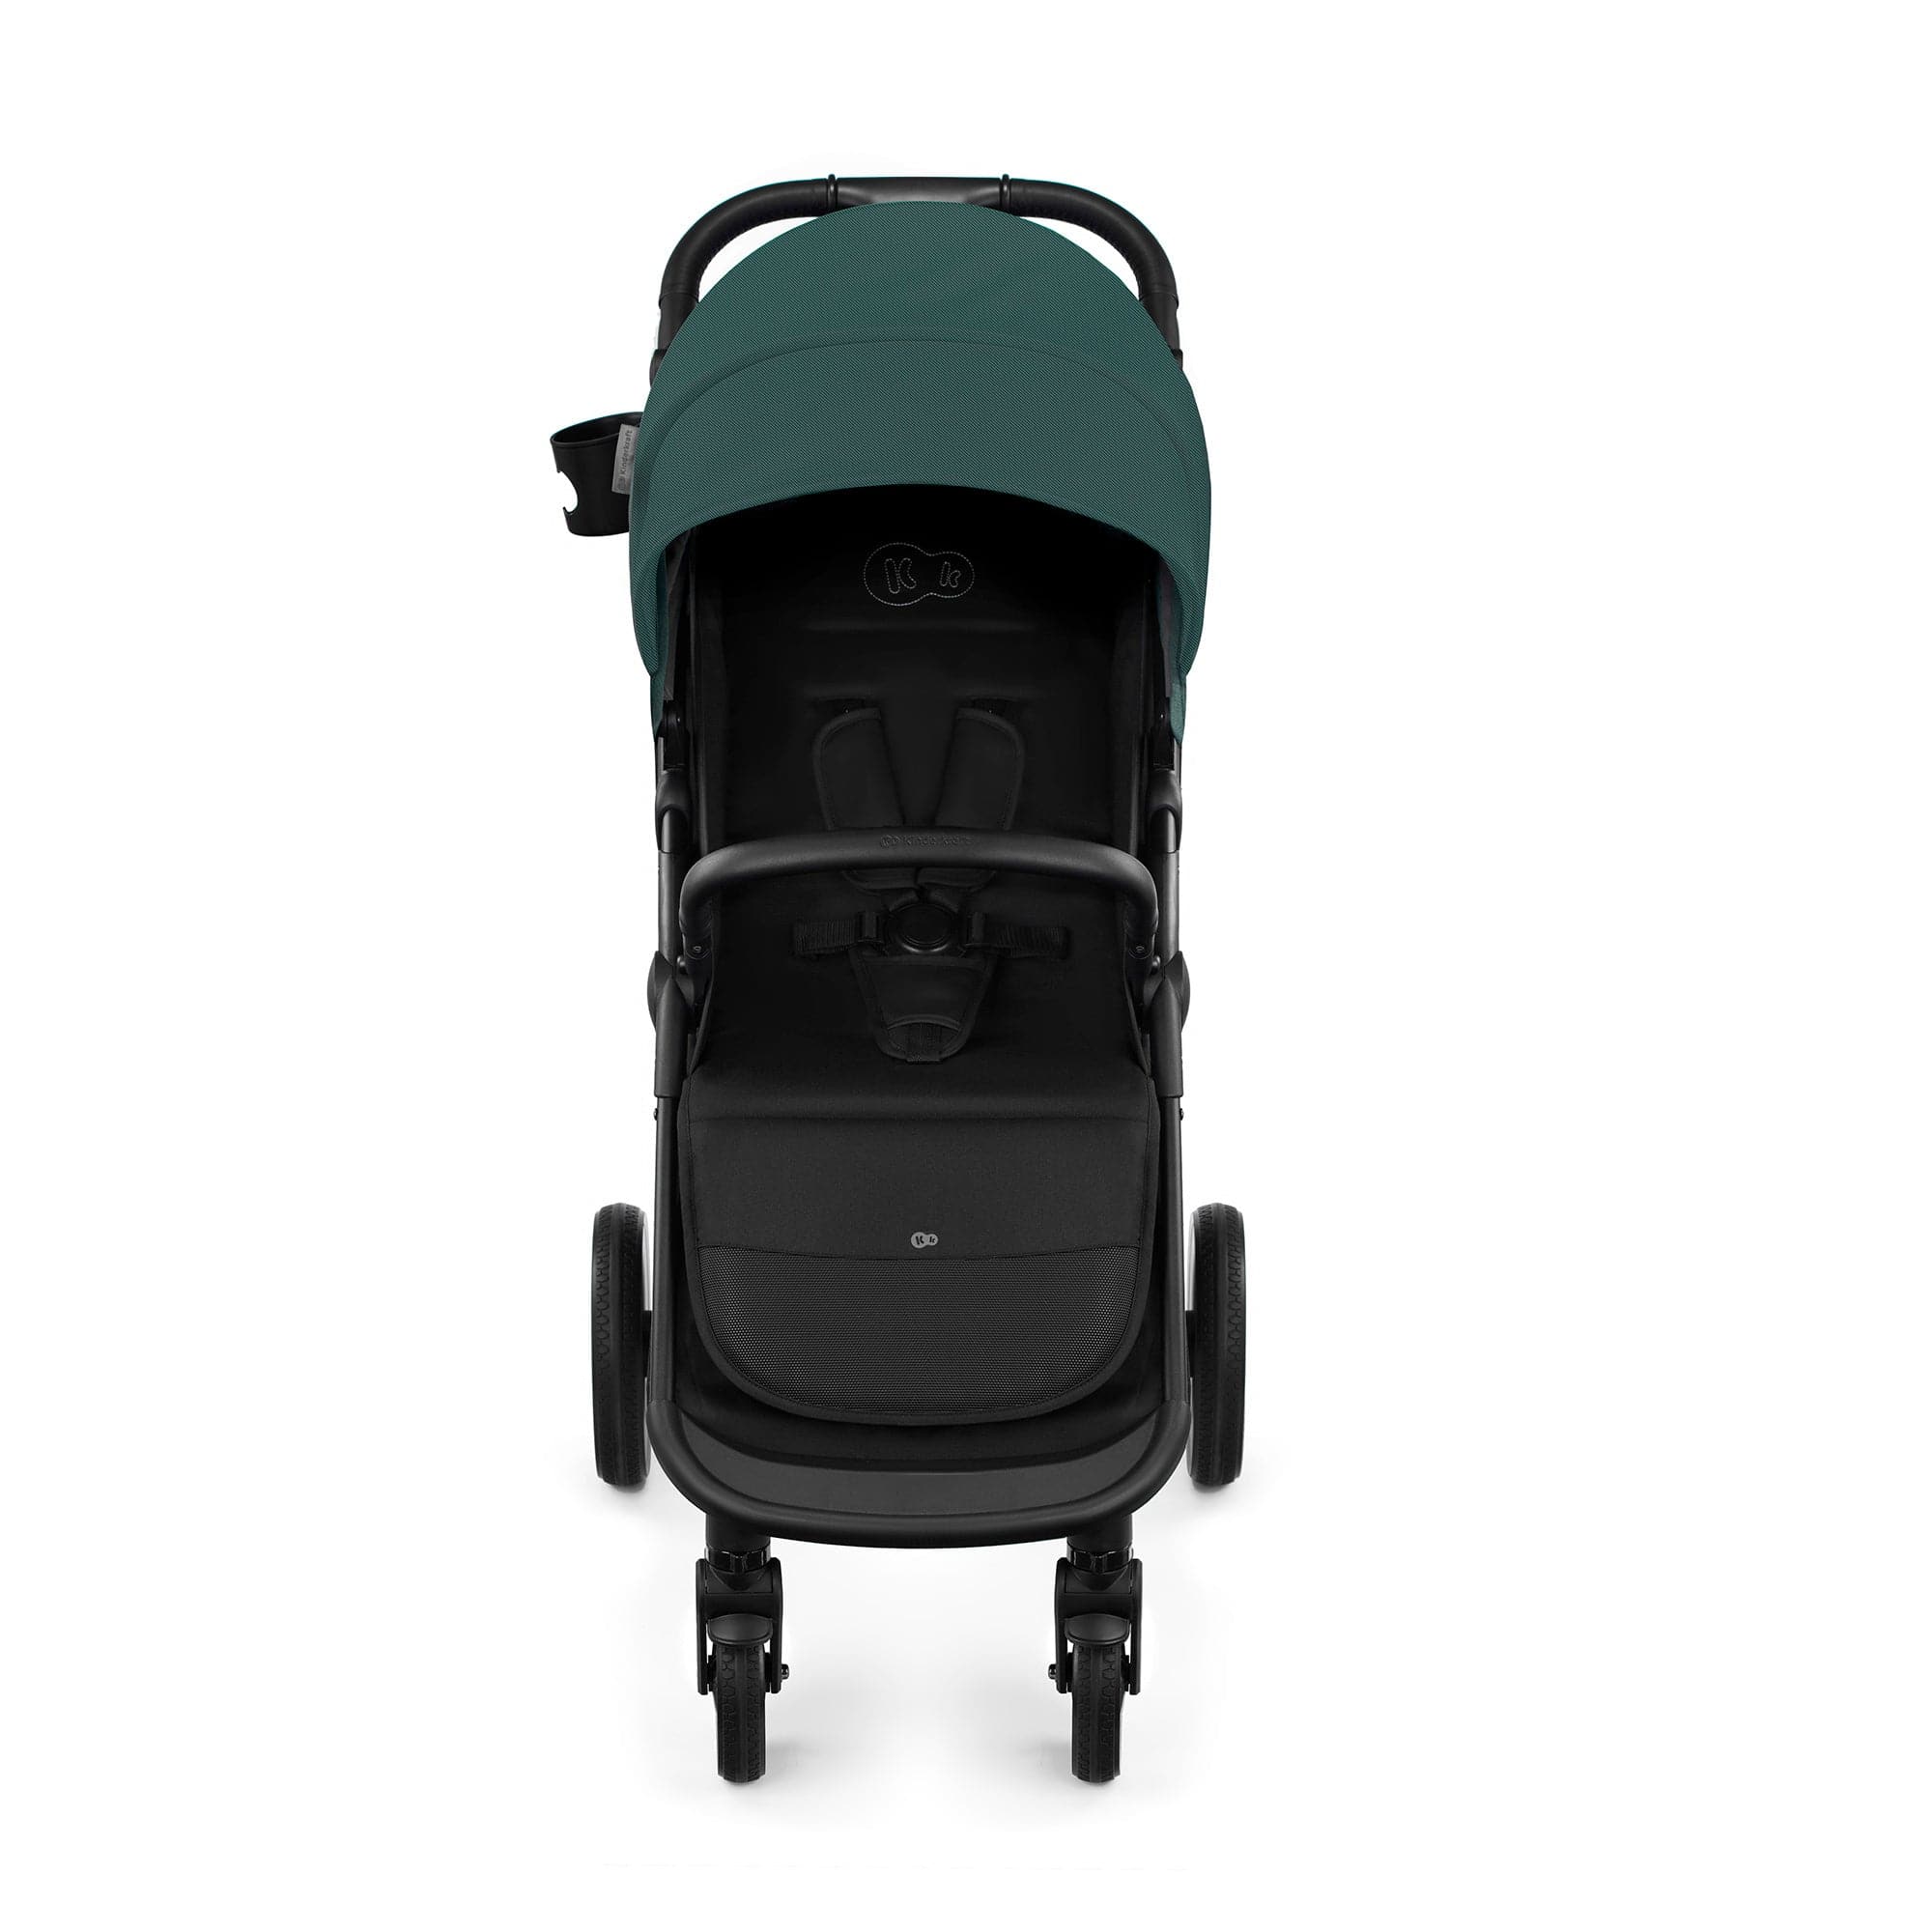 Kinderkraft pushchair Route - Green - For Your Little One